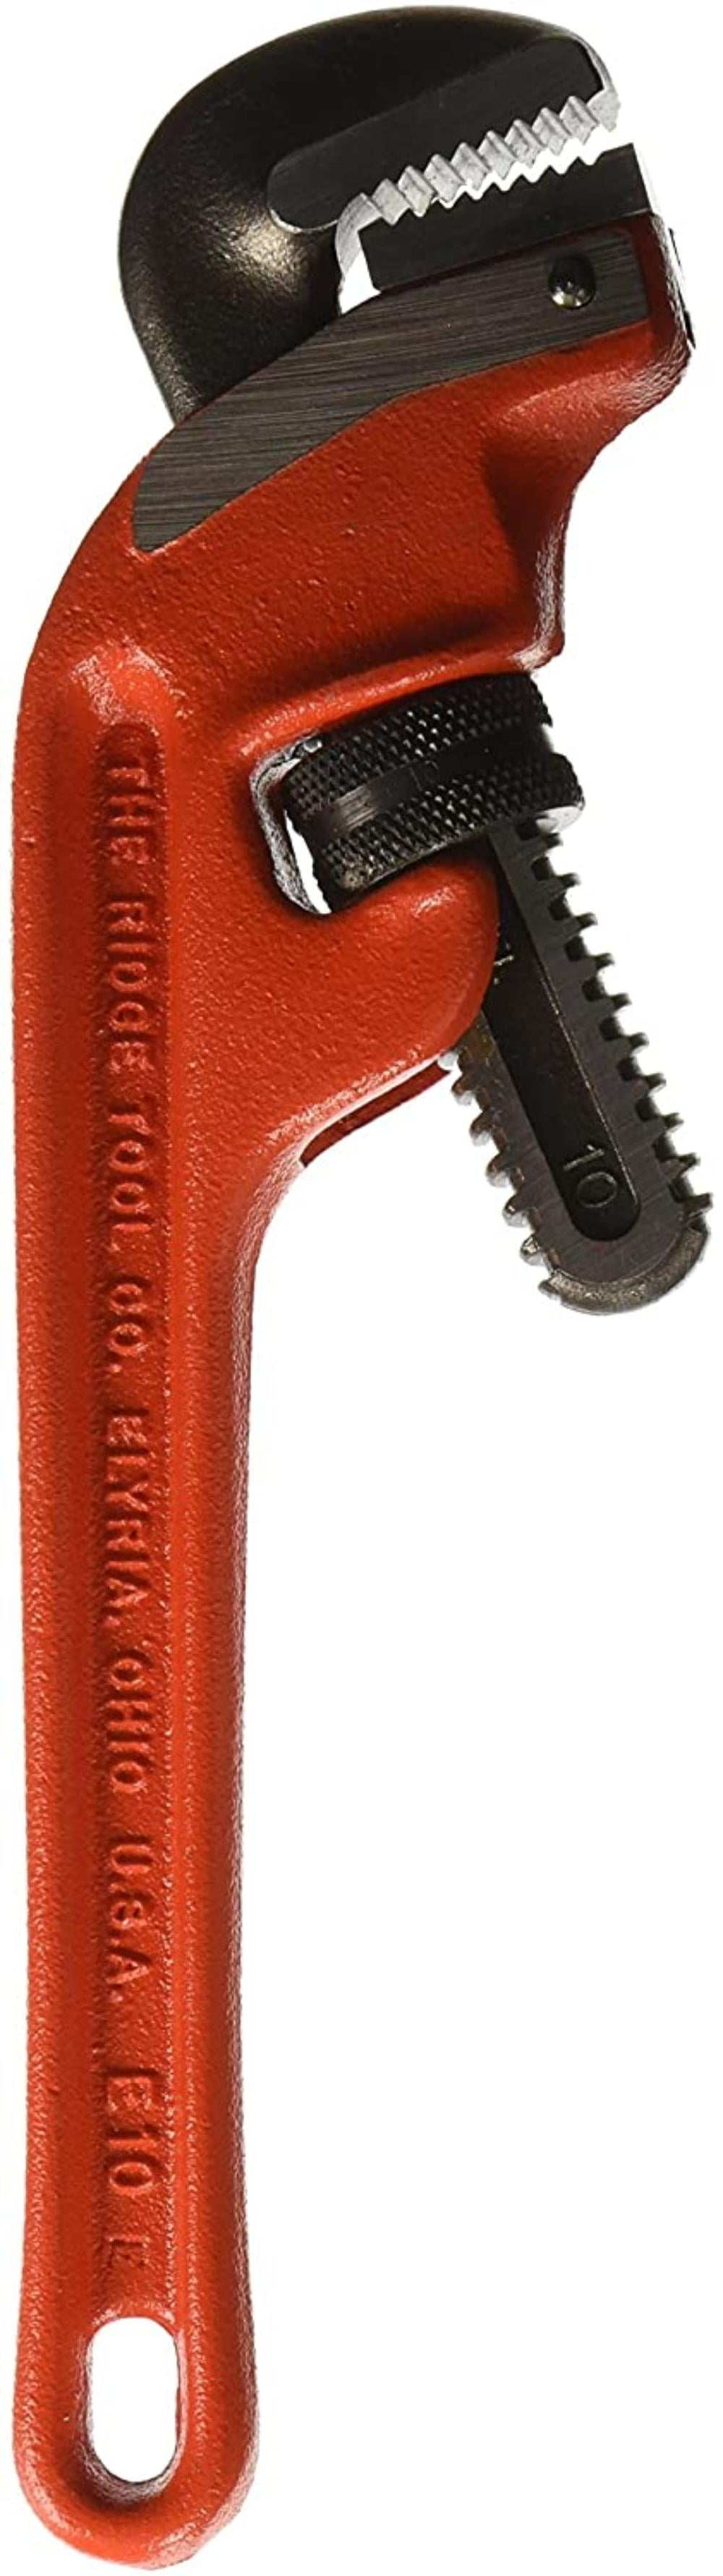 NEW OPEN Ridgid 31060 Model E-10 10" End Pipe Wrench 1 1/2" 